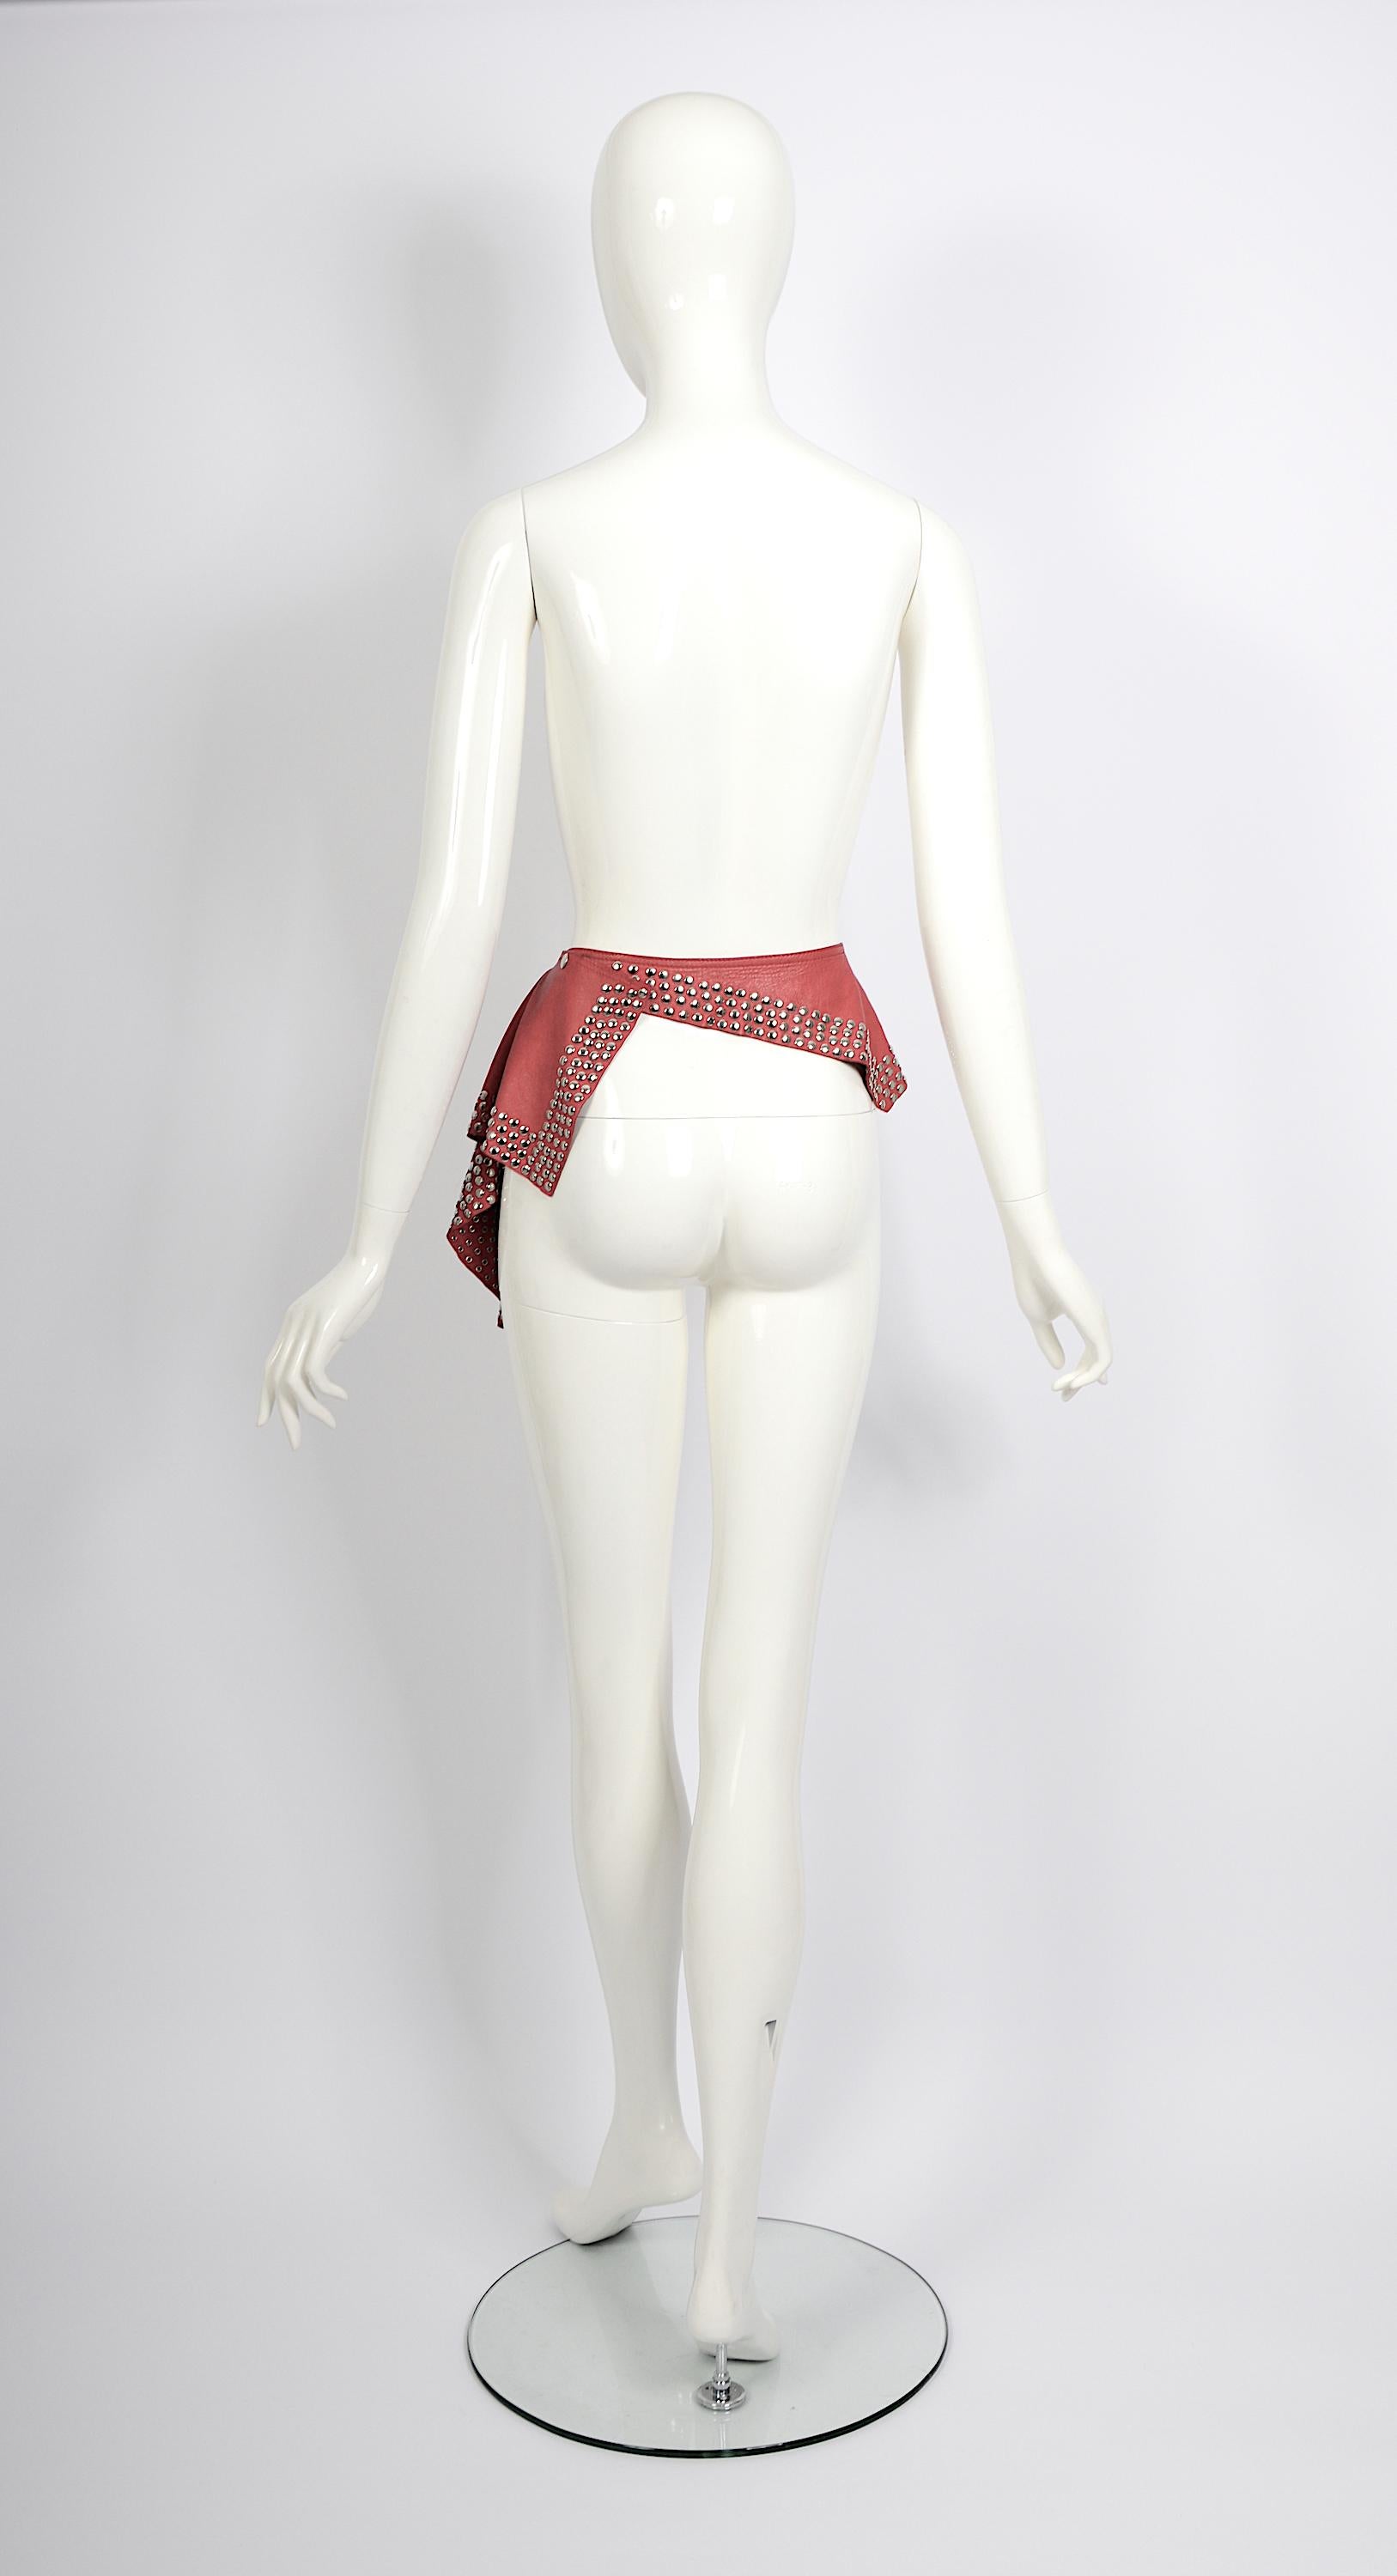 Azzedine Alaia circa 1981 collectors studded embellished red leather belt skirt For Sale 3